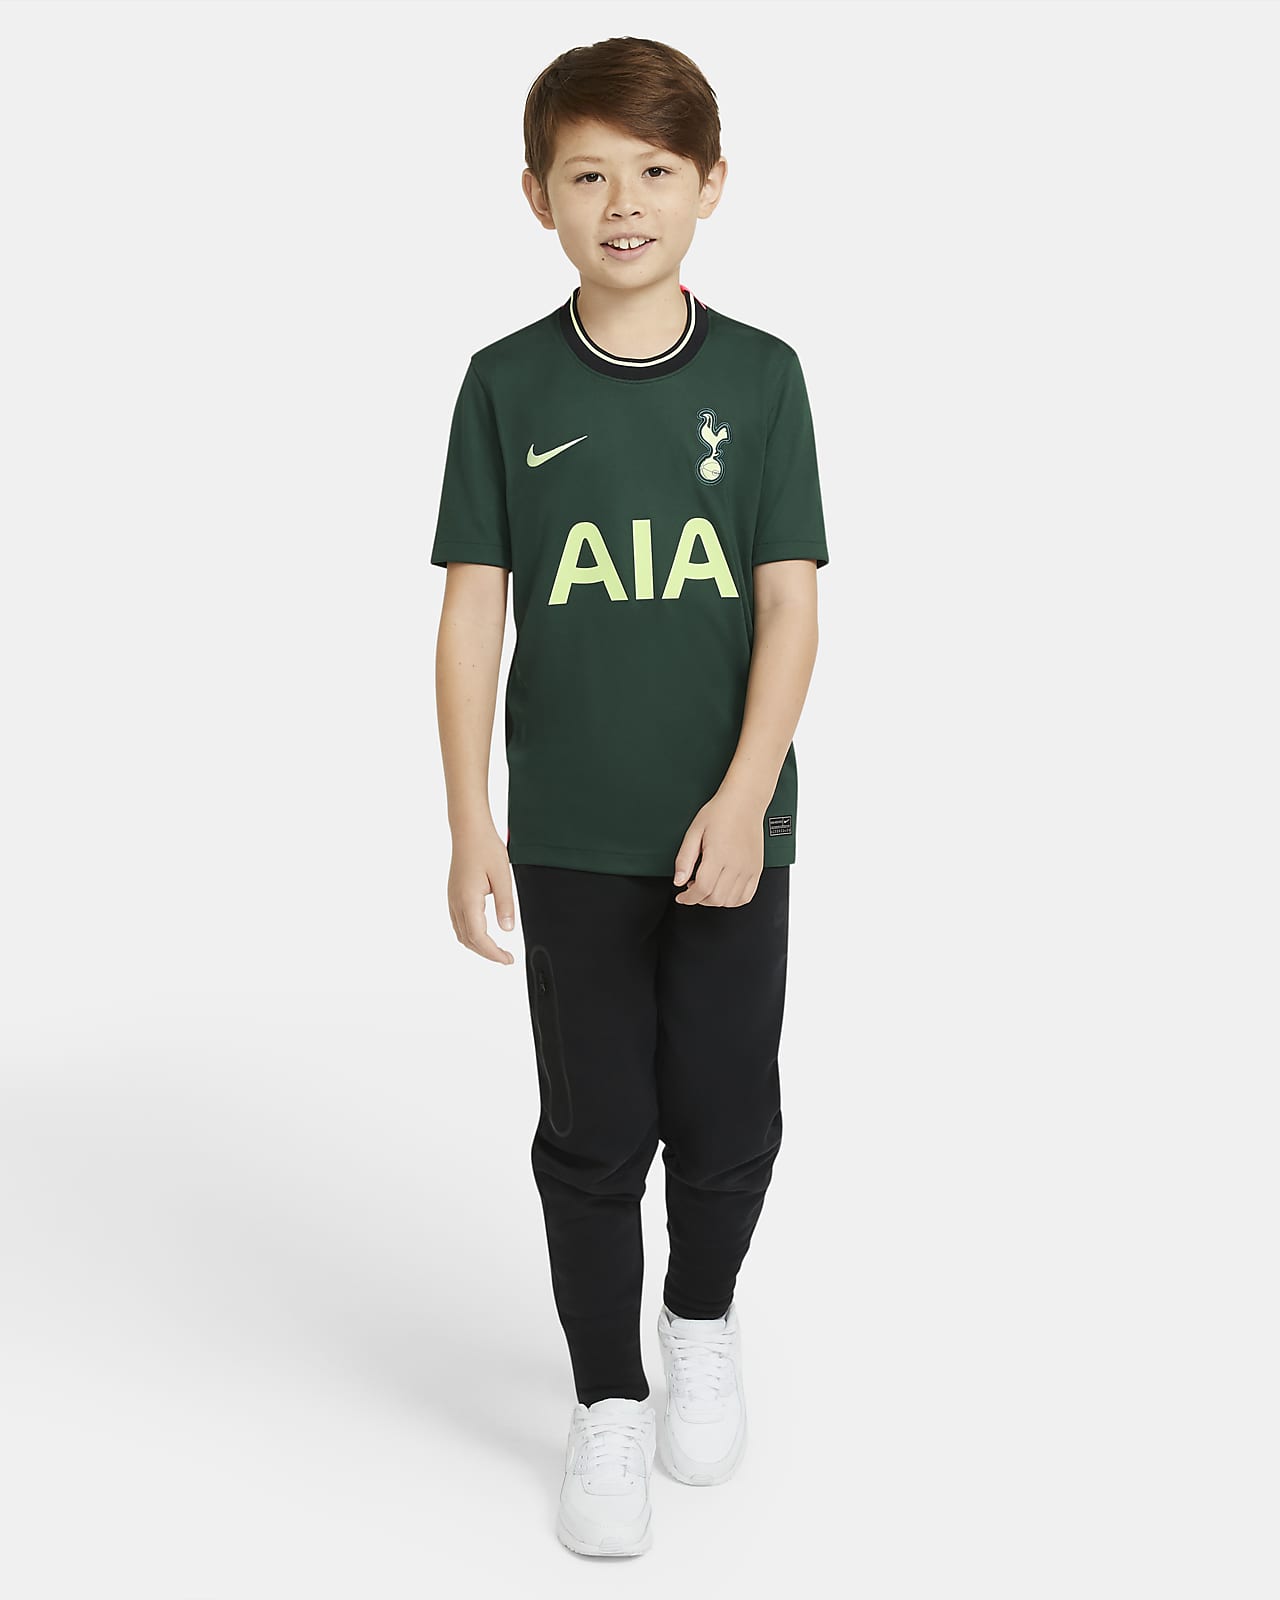 Buy > spurs training tracksuit youth > in stock